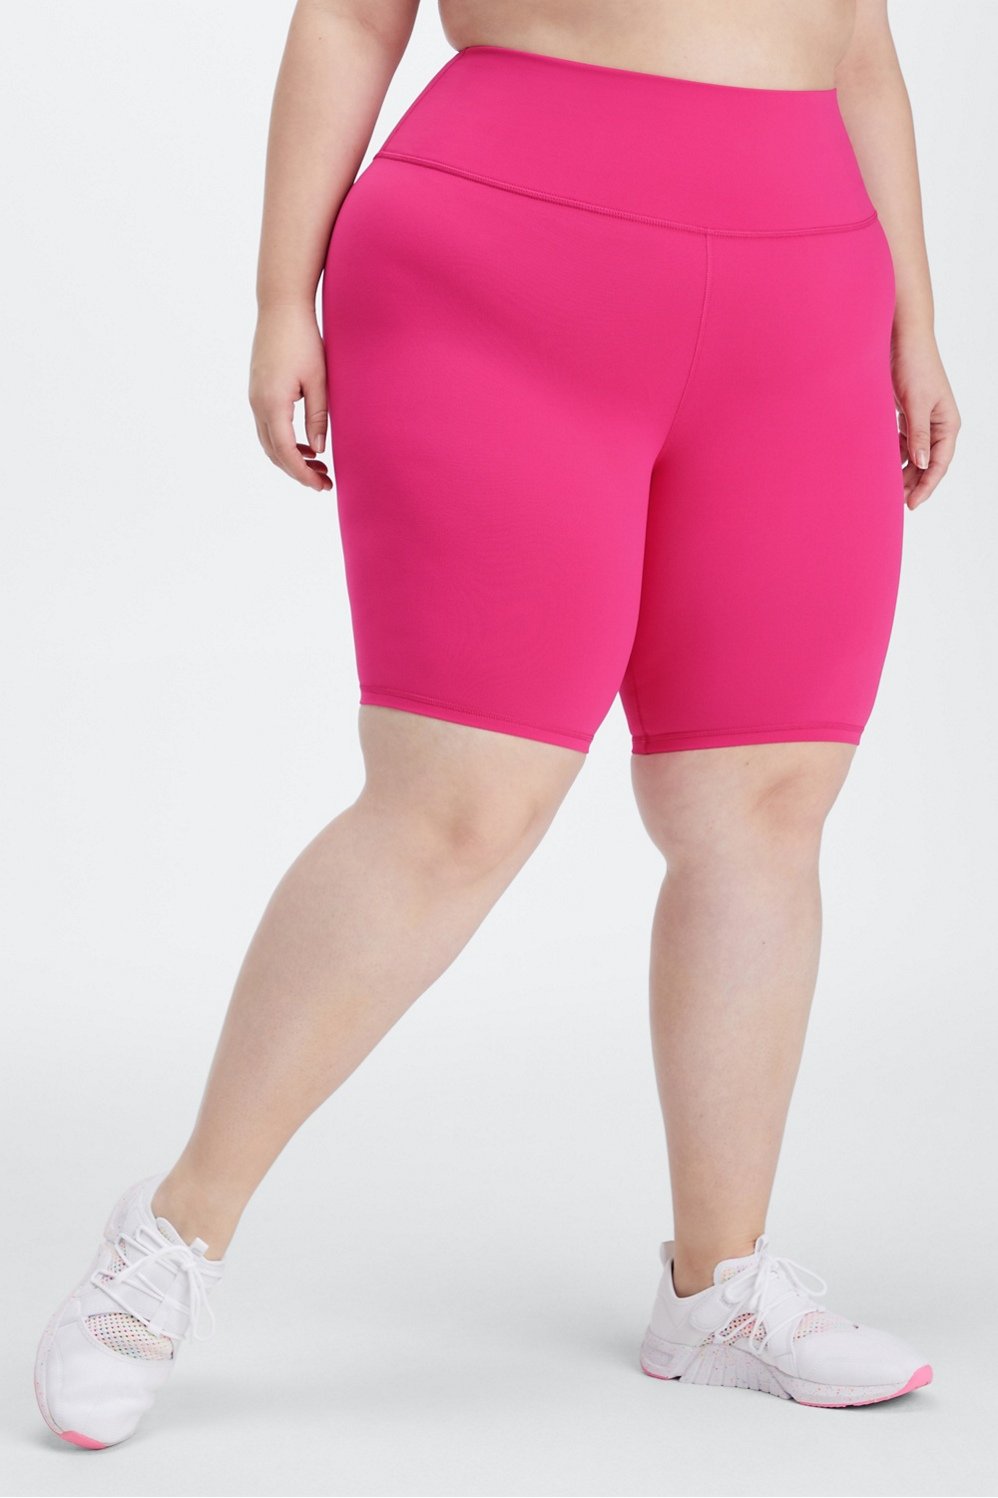 Womens Black Shorts High Waisted Shorts Pink High Waisted Shorts Loose  Workout Shorts Women Lightning Deals of Today Prime Clearance Ofertas Del  Dia De Hoy Relampago Lightning Deals of Today Prime